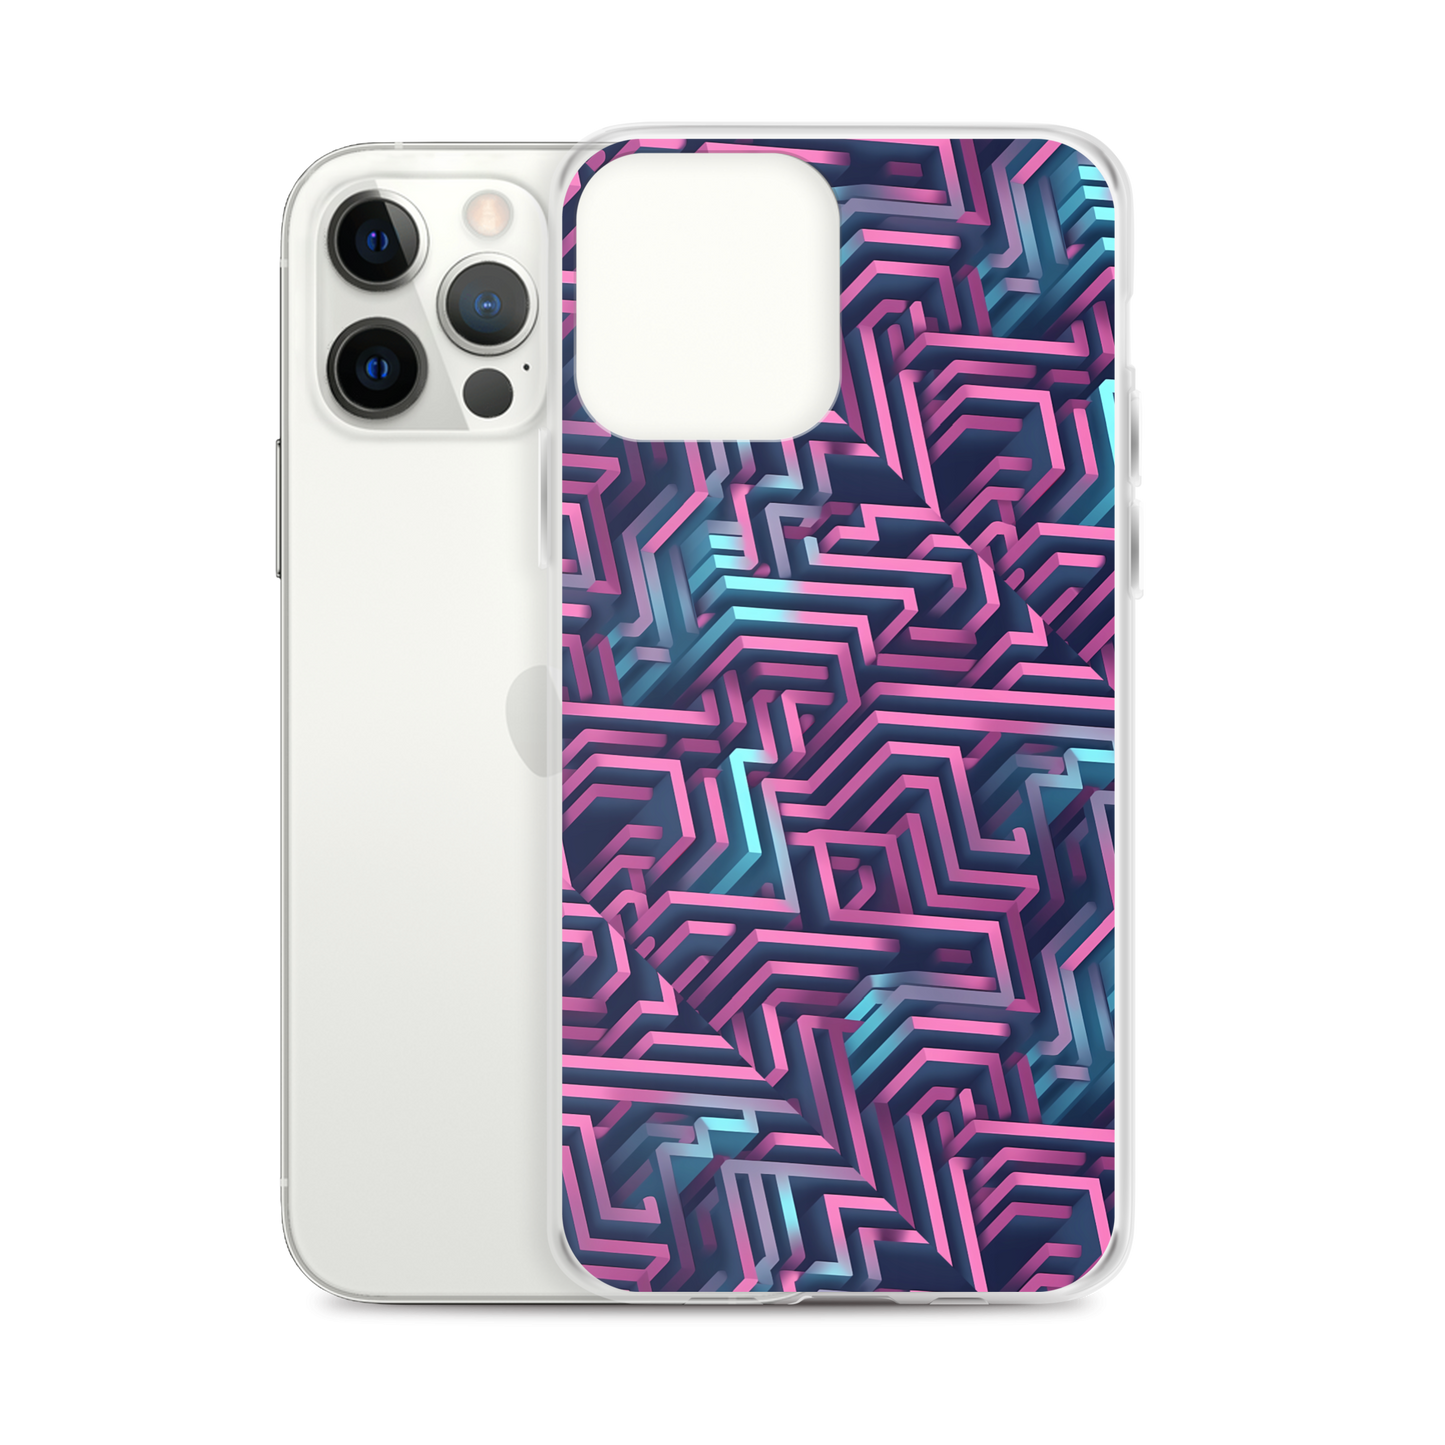 3D Maze Illusion | 3D Patterns | Clear Case for iPhone - #3